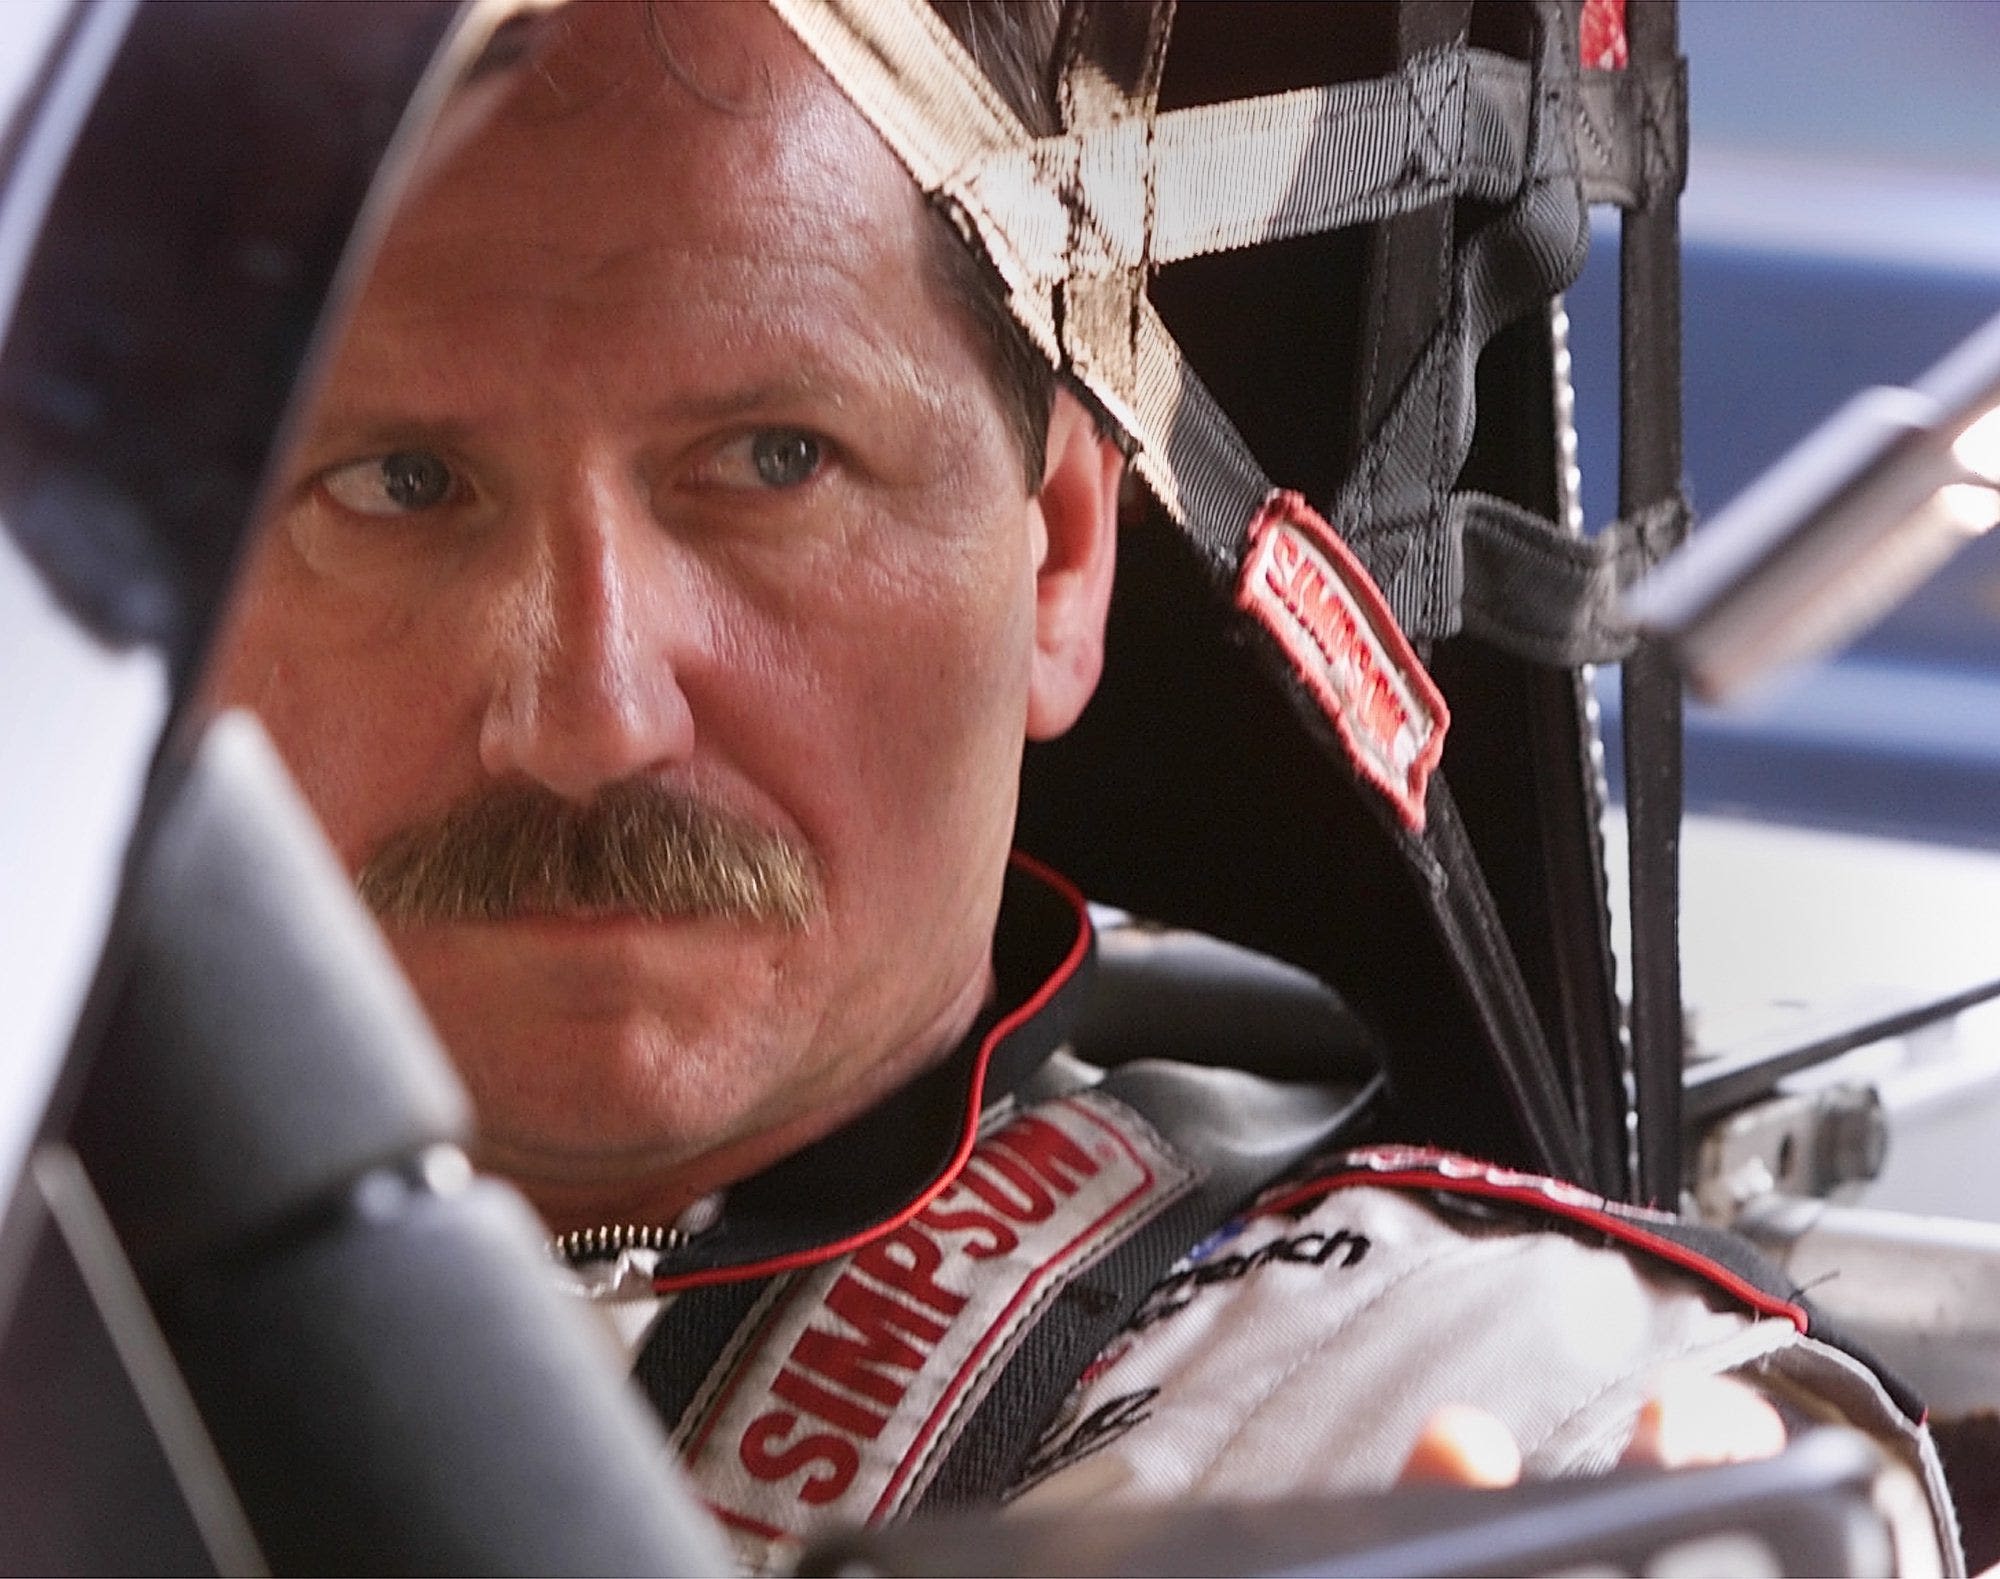 Who made the list of NASCAR’s 75 greatest drivers?